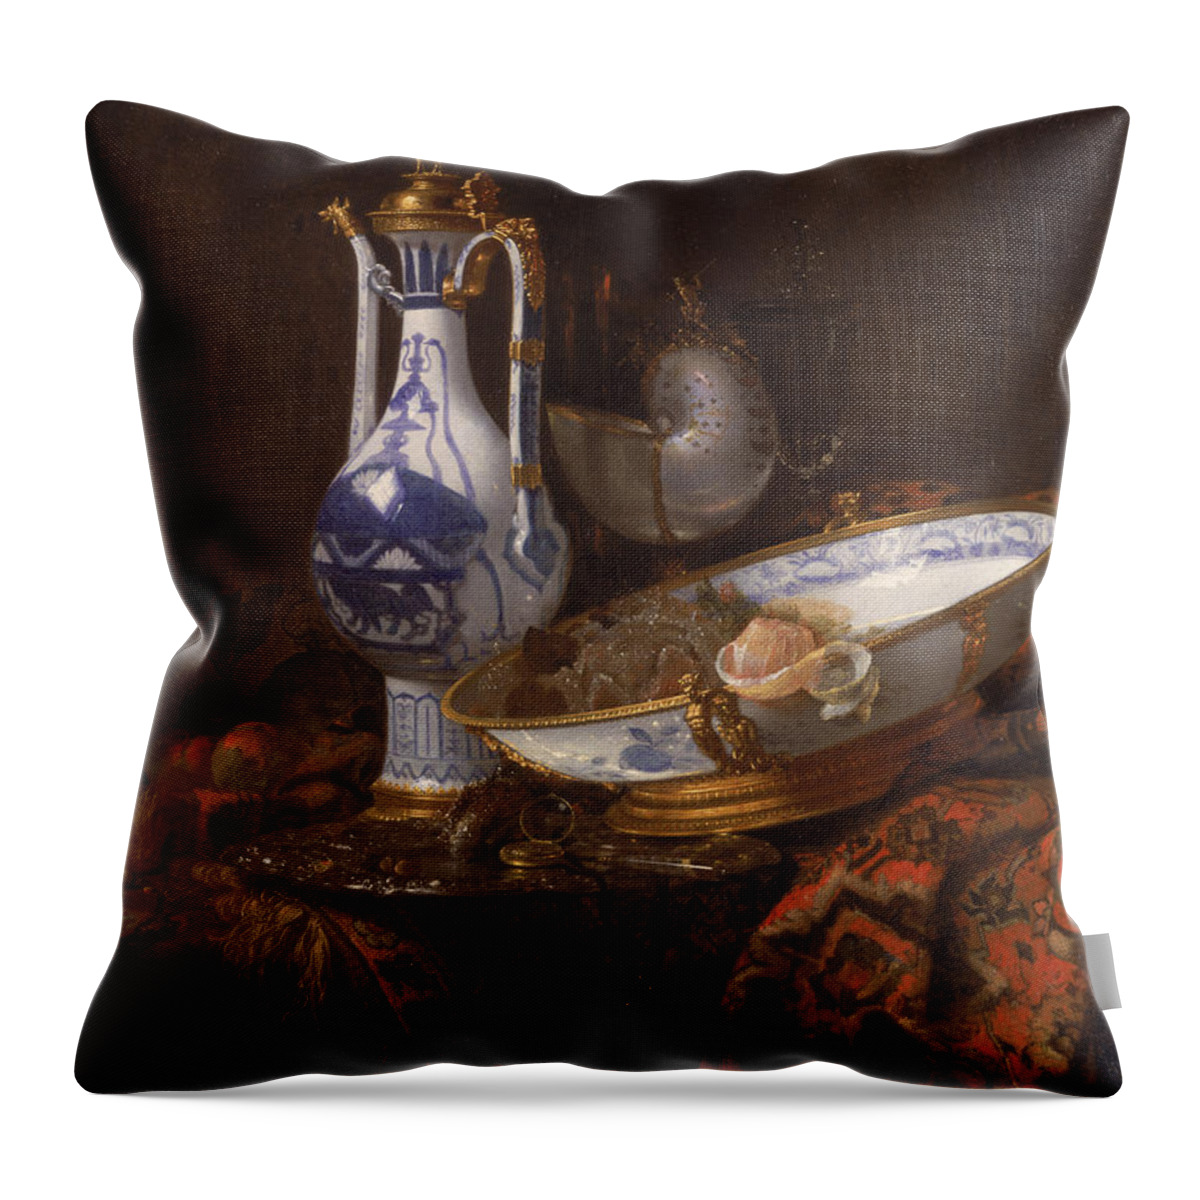 Still Life Throw Pillow featuring the painting Still Life by Willem Kalf